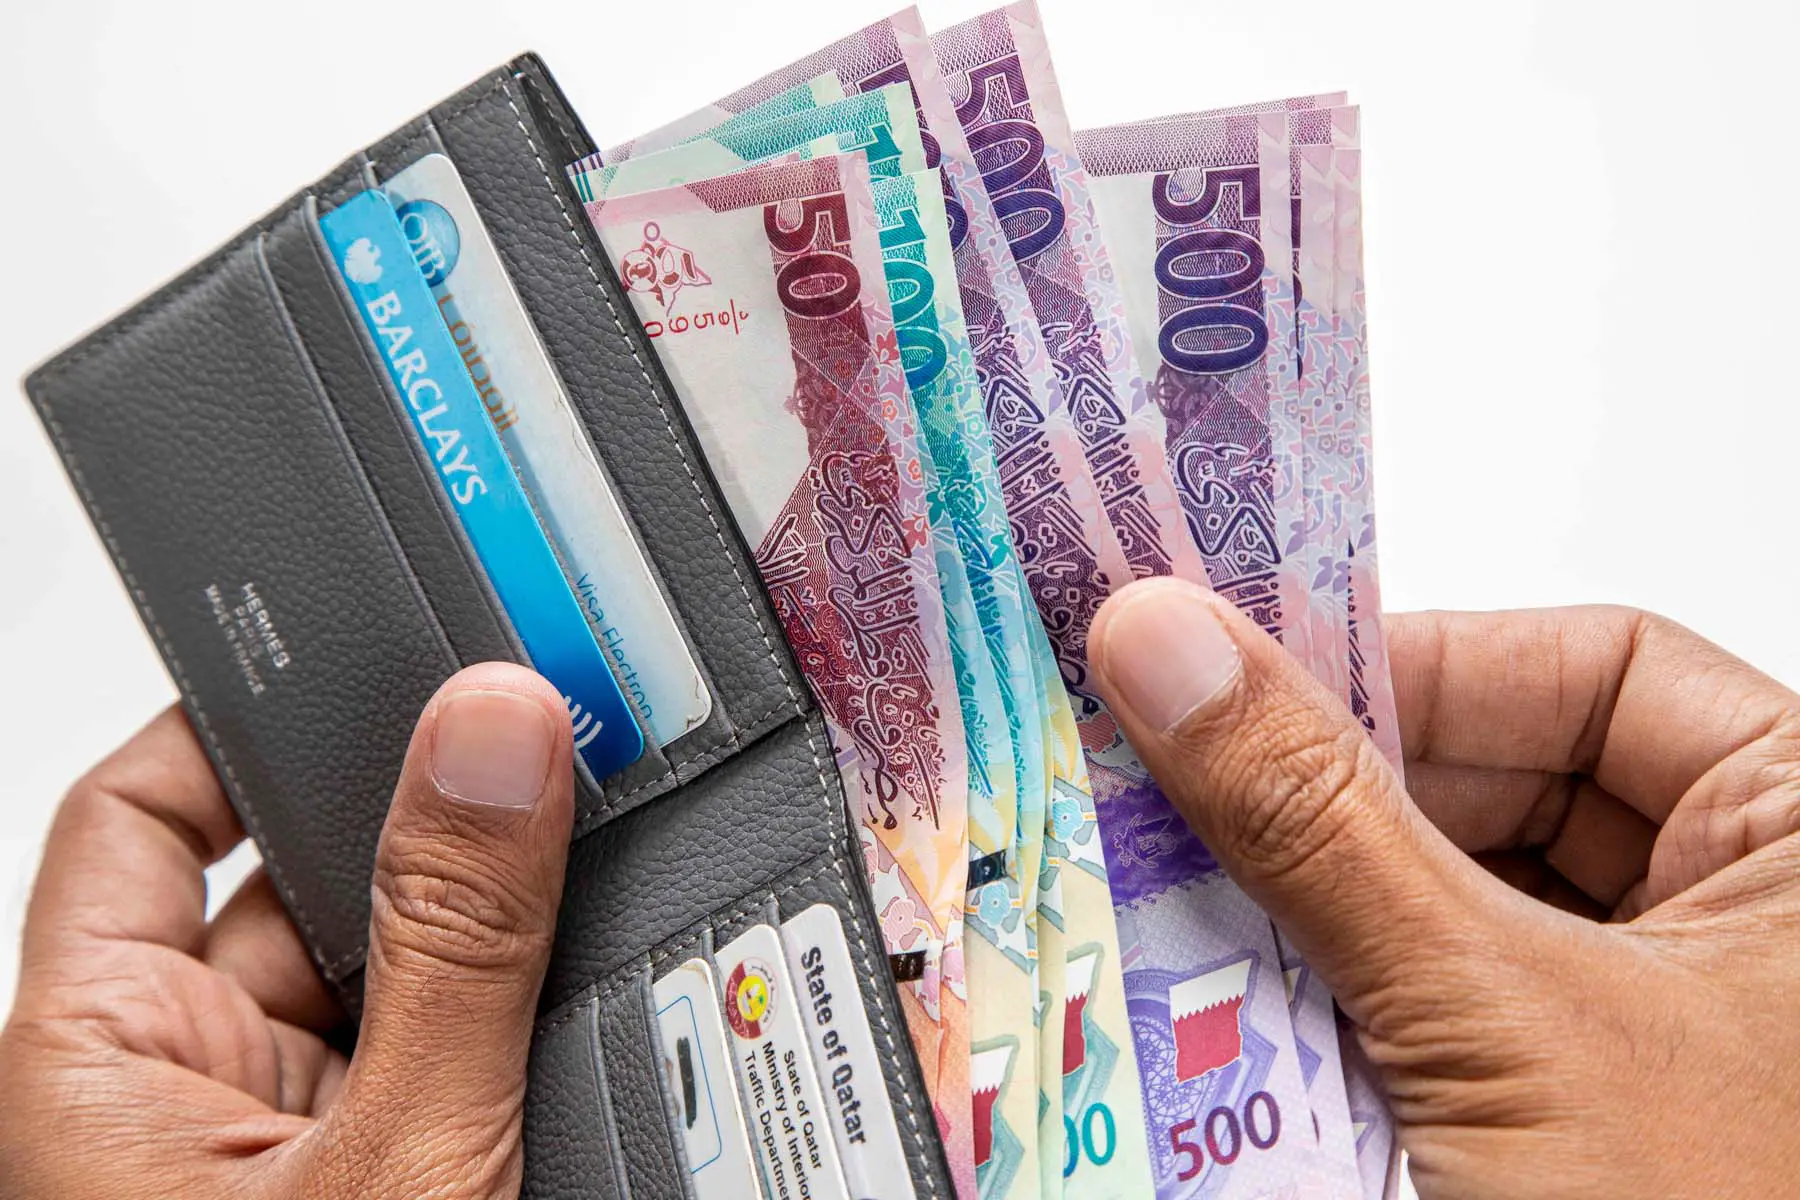 wallet filled with Qatari cash and cards